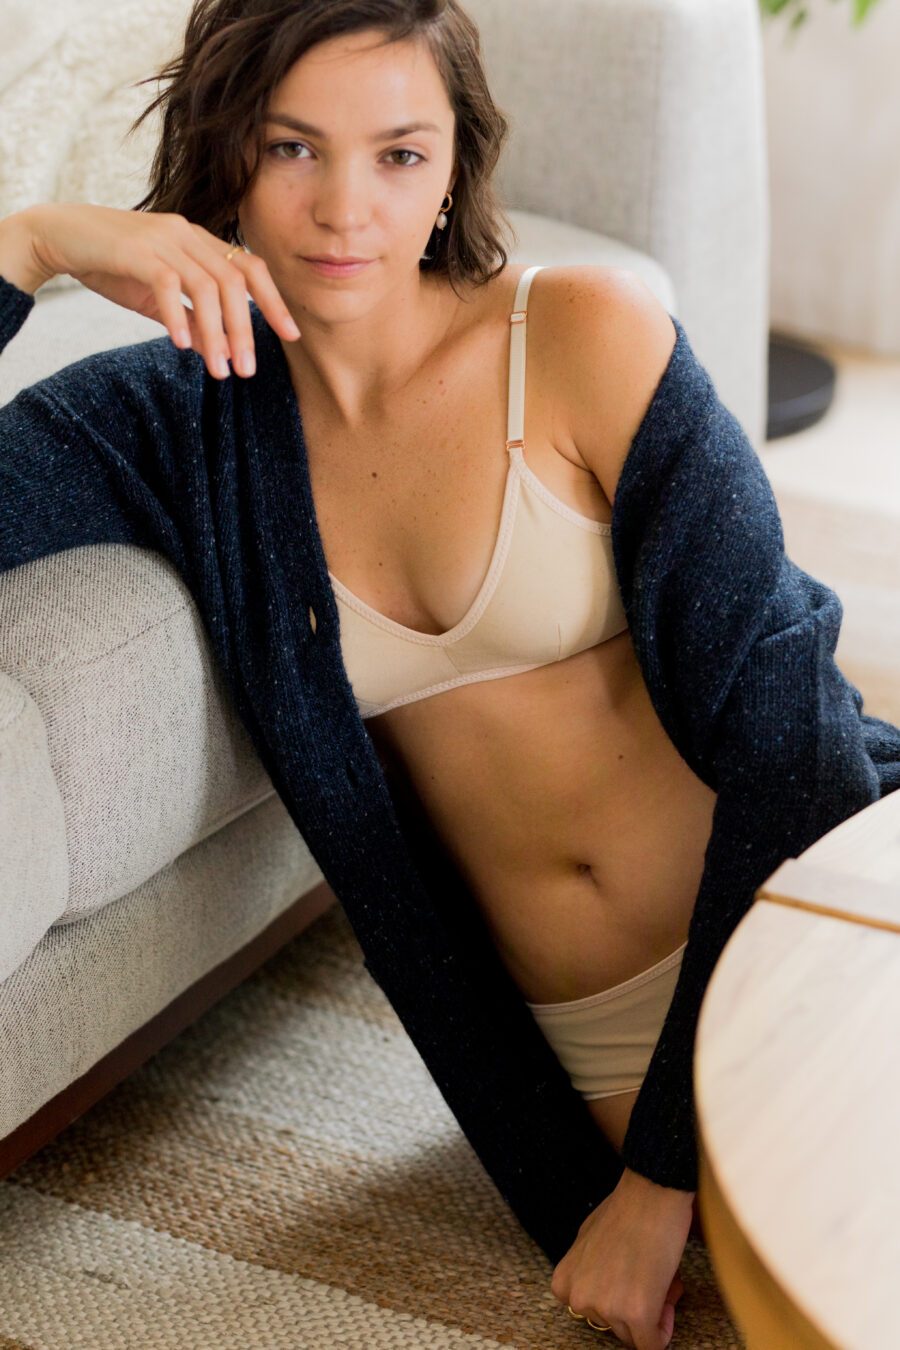 A model wearing organic cotton lingerie and a robe, while seated on he floor leaning against a couch.